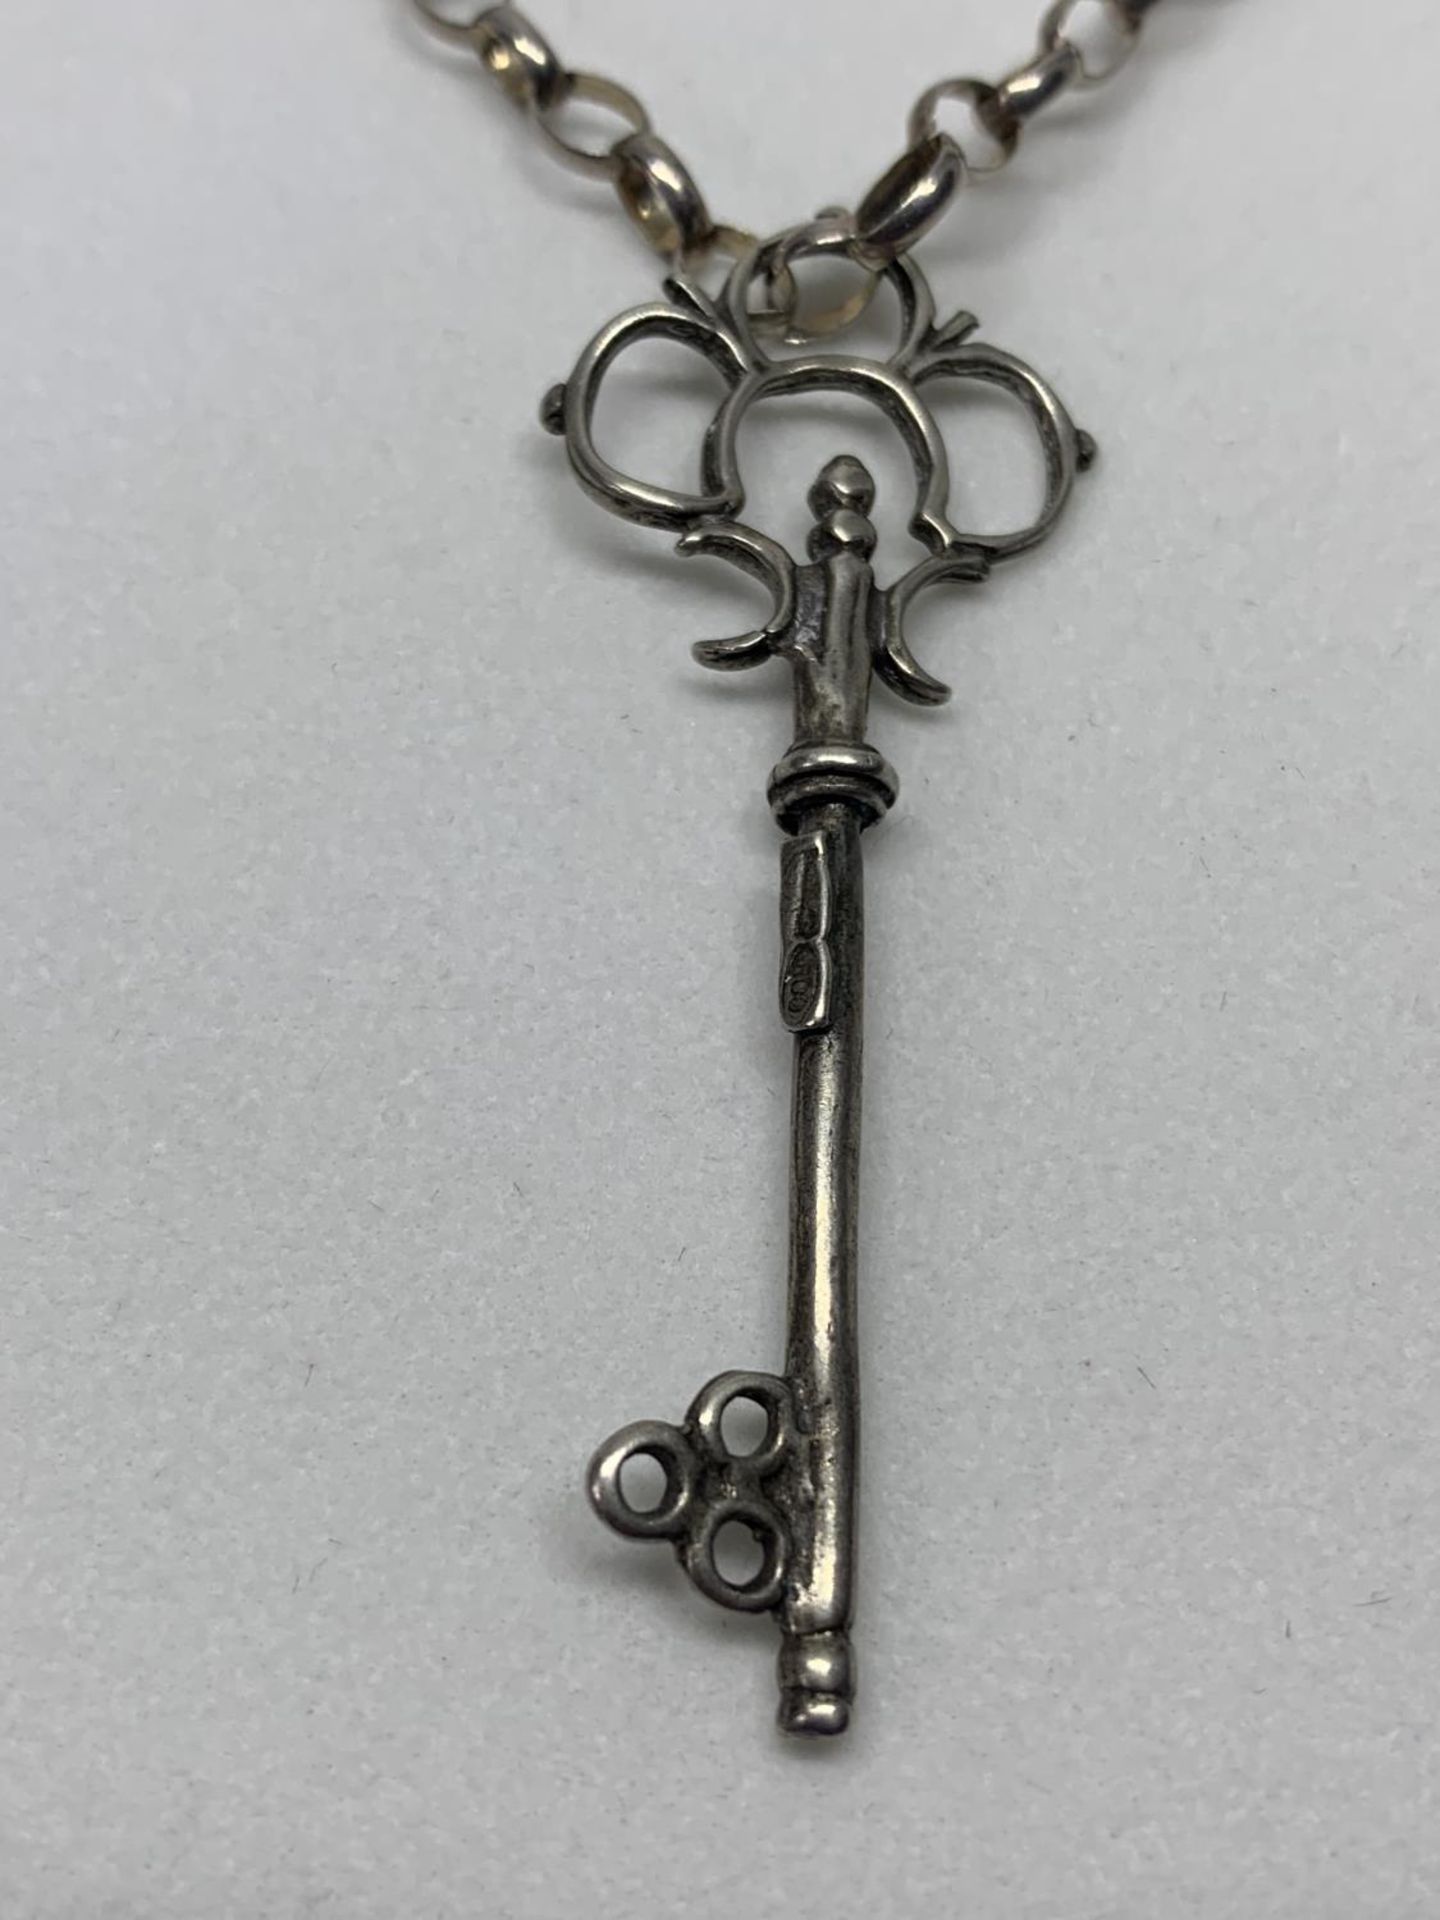 A SILVER NECKLACE WITH KEY PENDANT IN A PRESENTATION BOX - Image 2 of 3